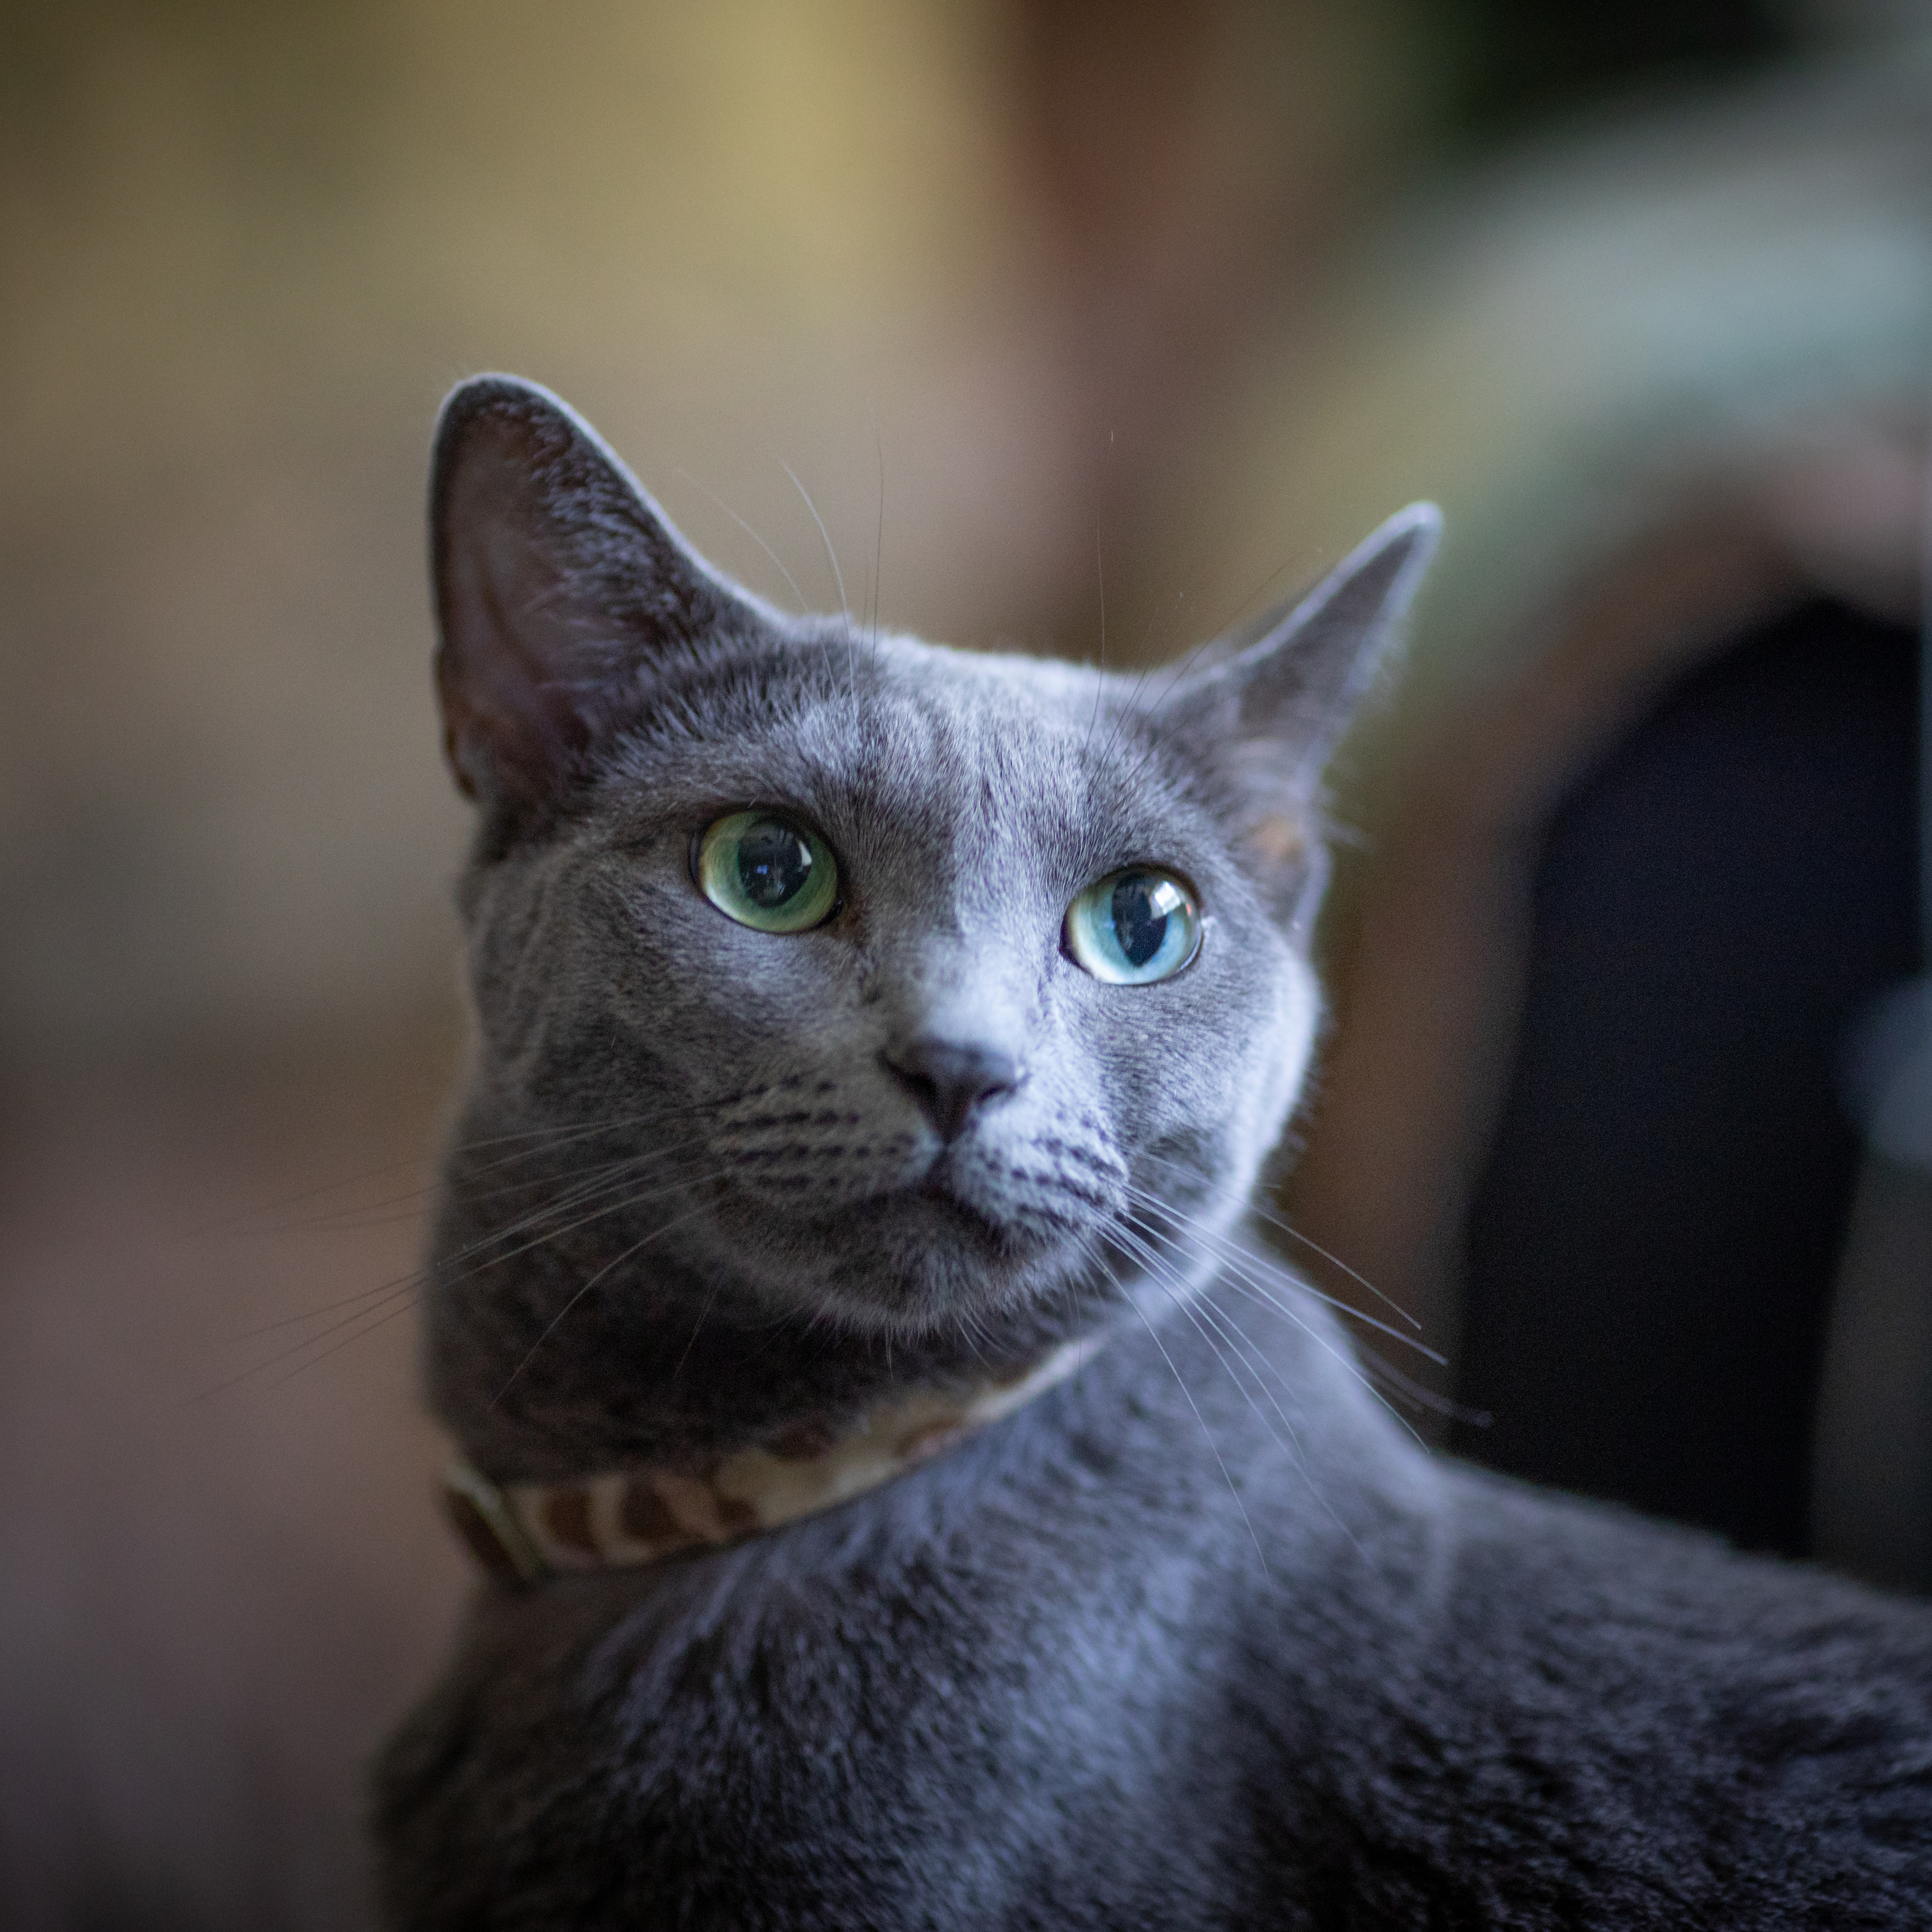 A close-up of a grey cat with a striped collar, looking to the side